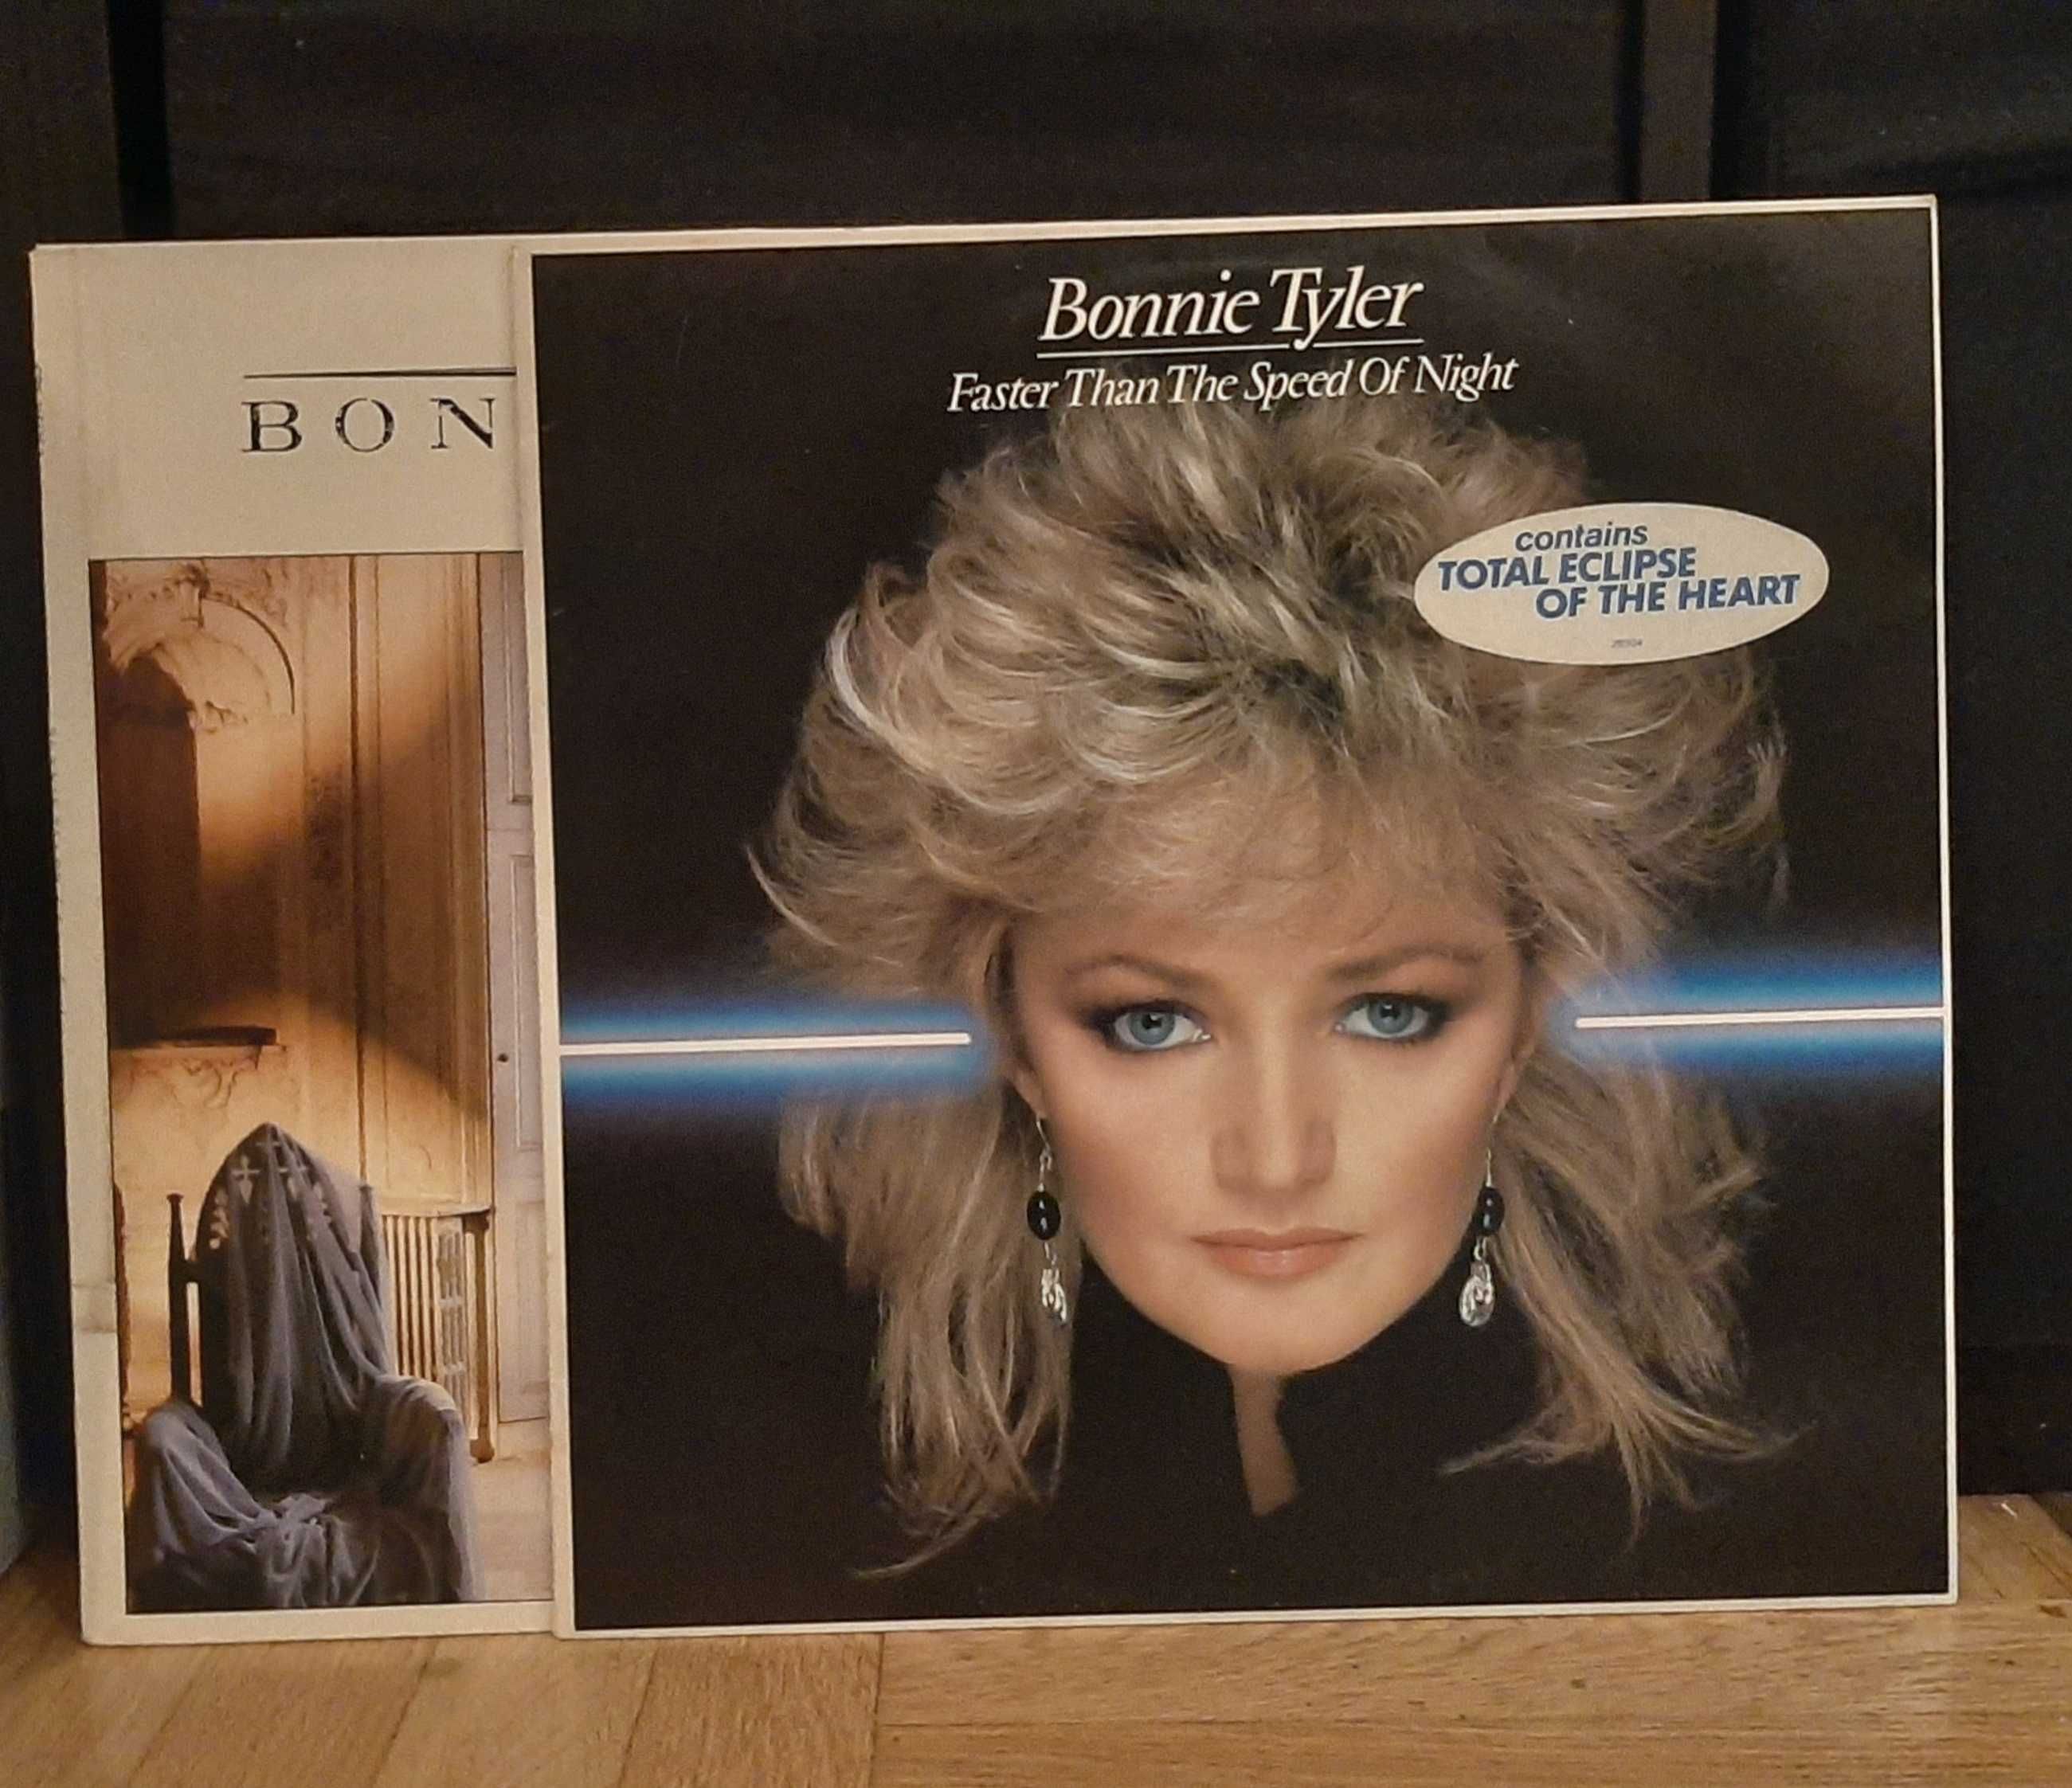 Bonnie Tyler - 2LP Hide your heart i Faster than speed of night winyl